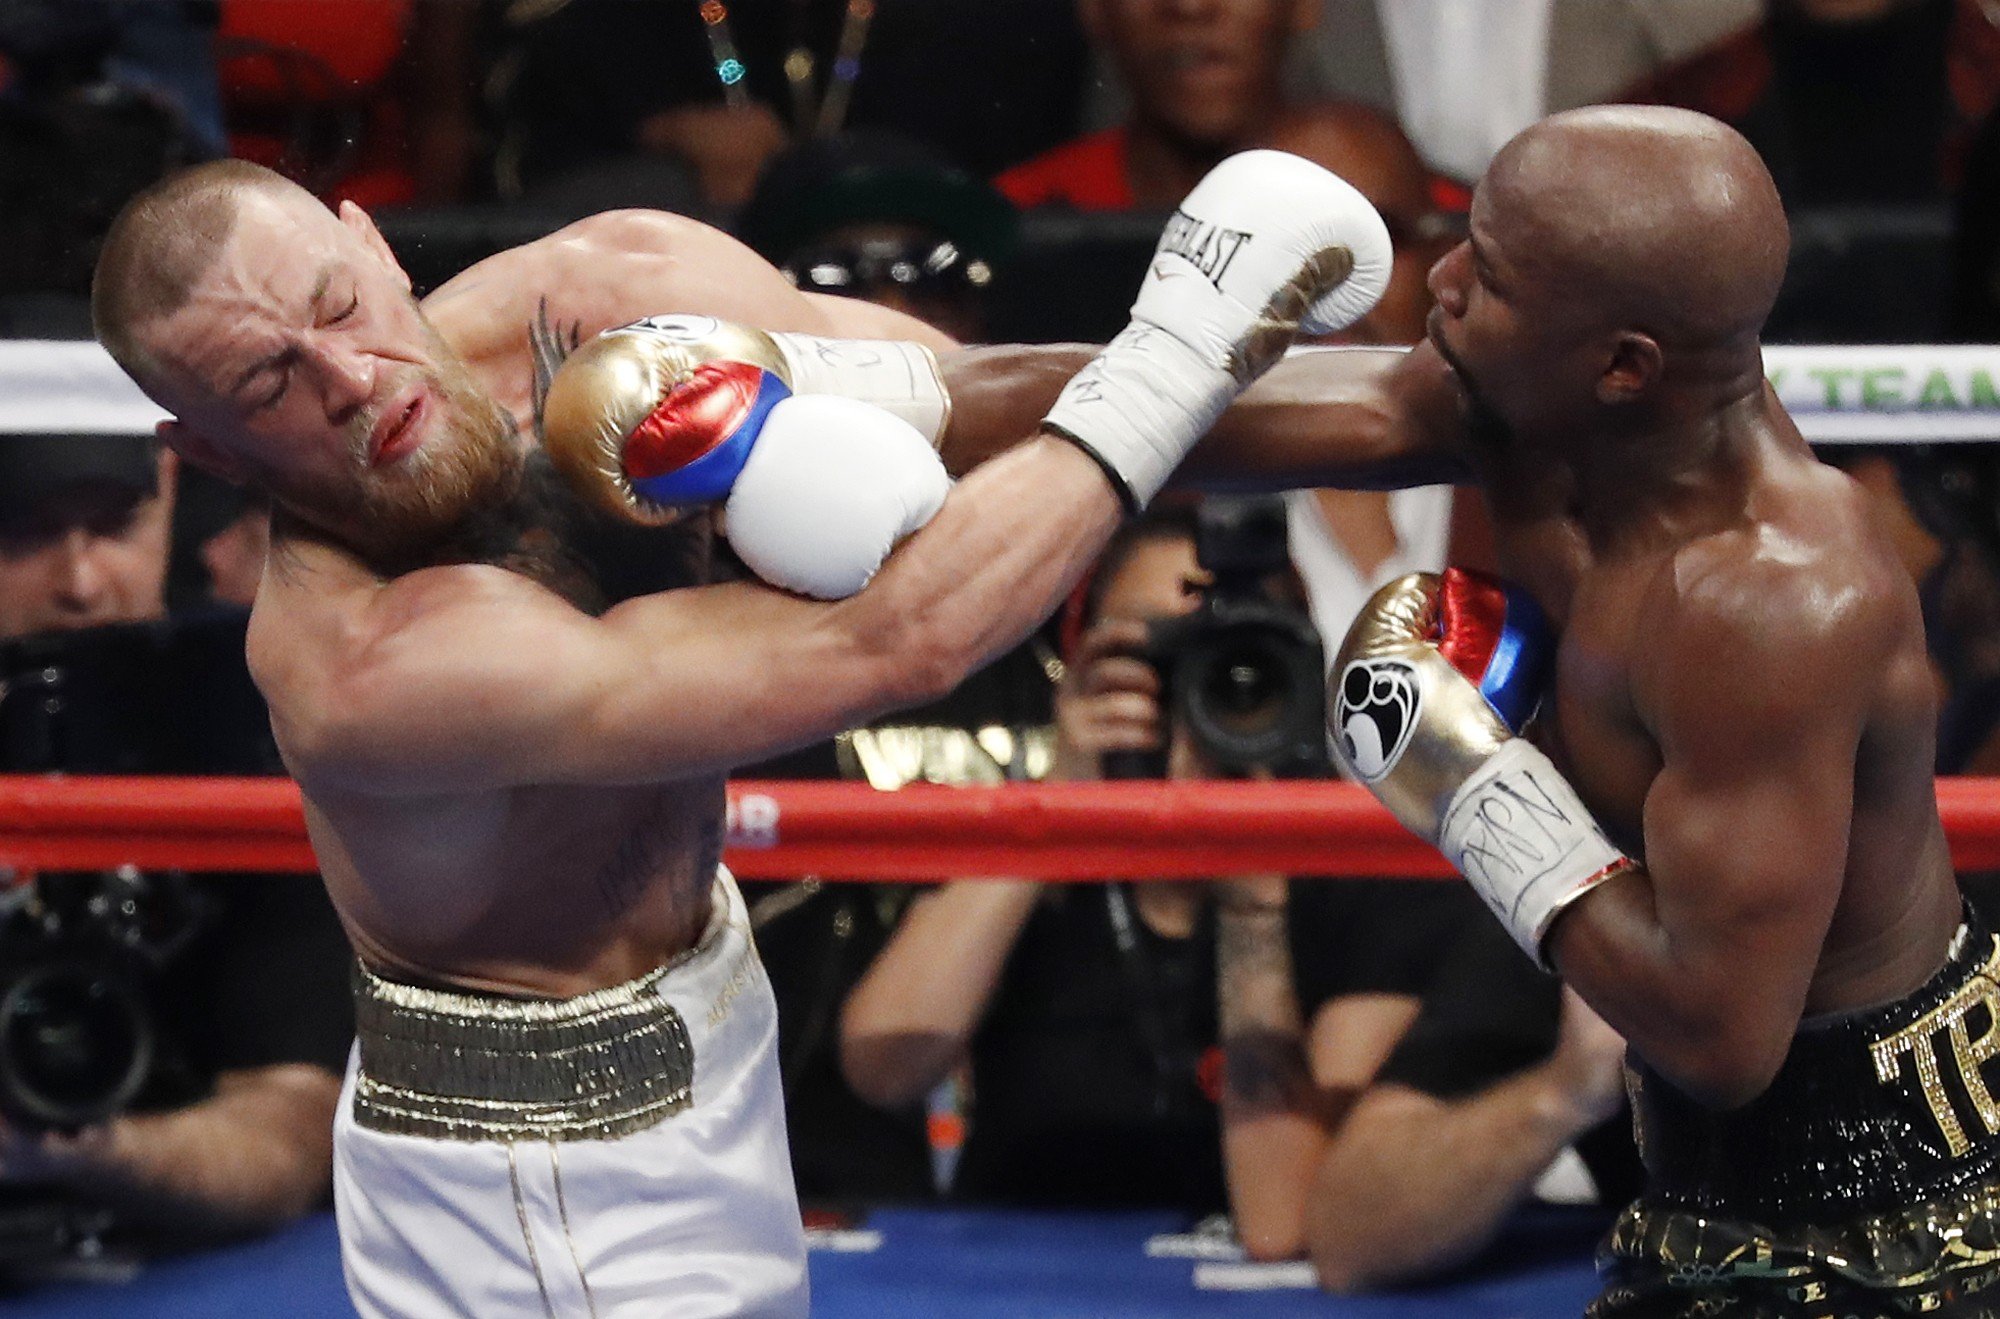 Conor McGregor and Floyd Mayweather collide in the boxing ring here – but that’s far from the only Western combat sport worth investigating. Photo: AP